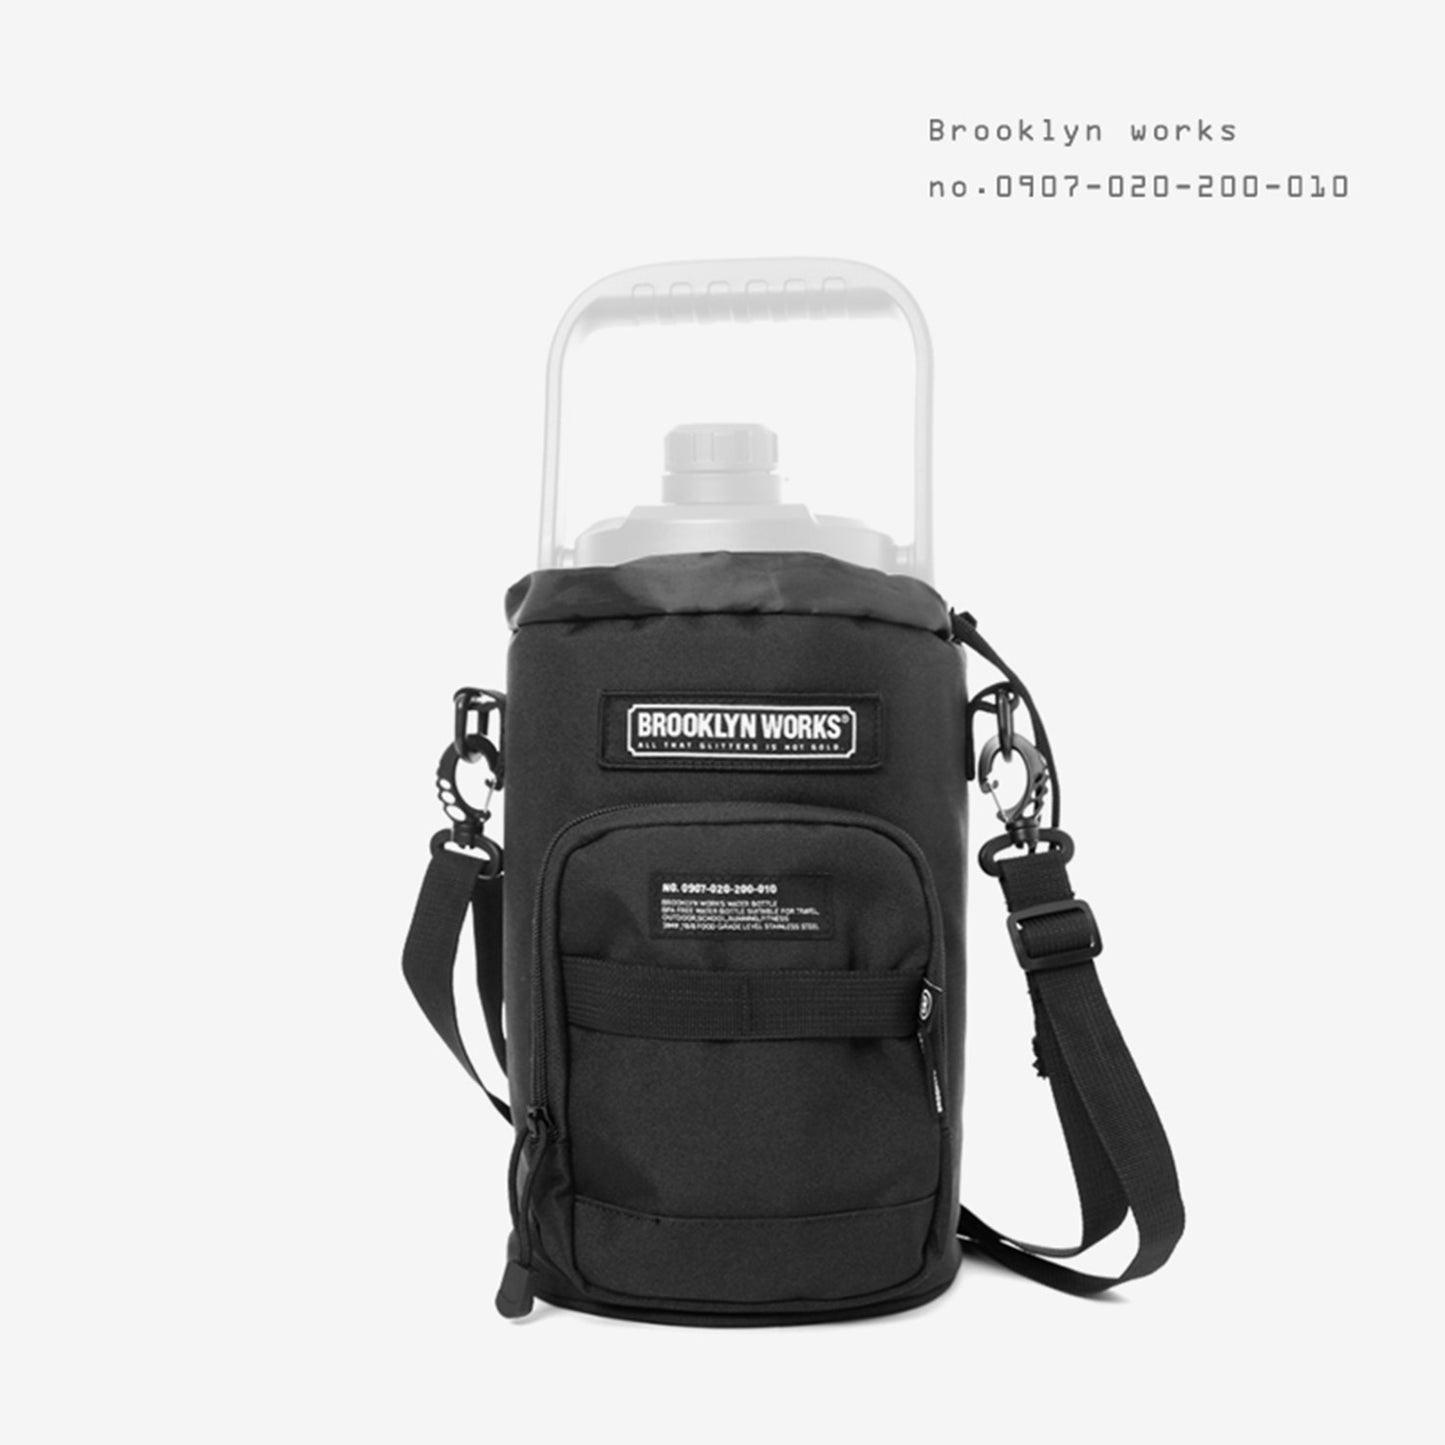 WATER JUG 3.8L POUCH / ウォータージャグ 3.8リットル ポーチ